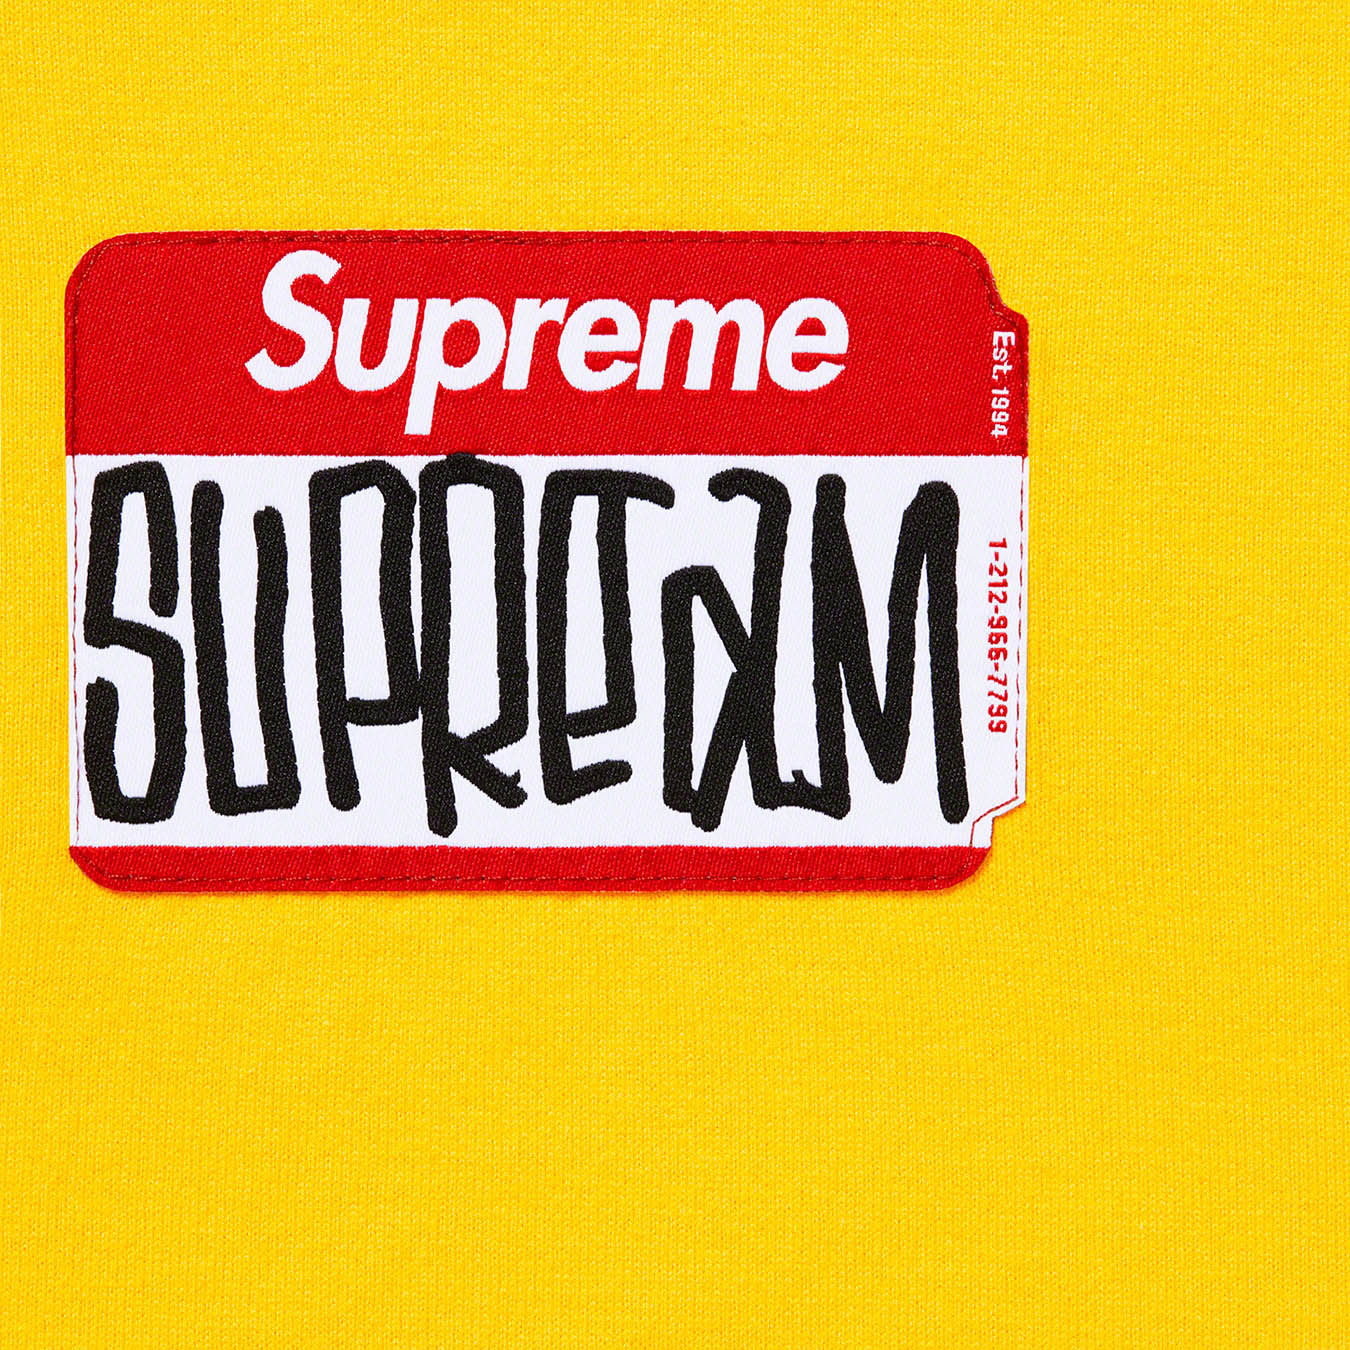 Gonz Nametag S/S Top | Supreme 21fw